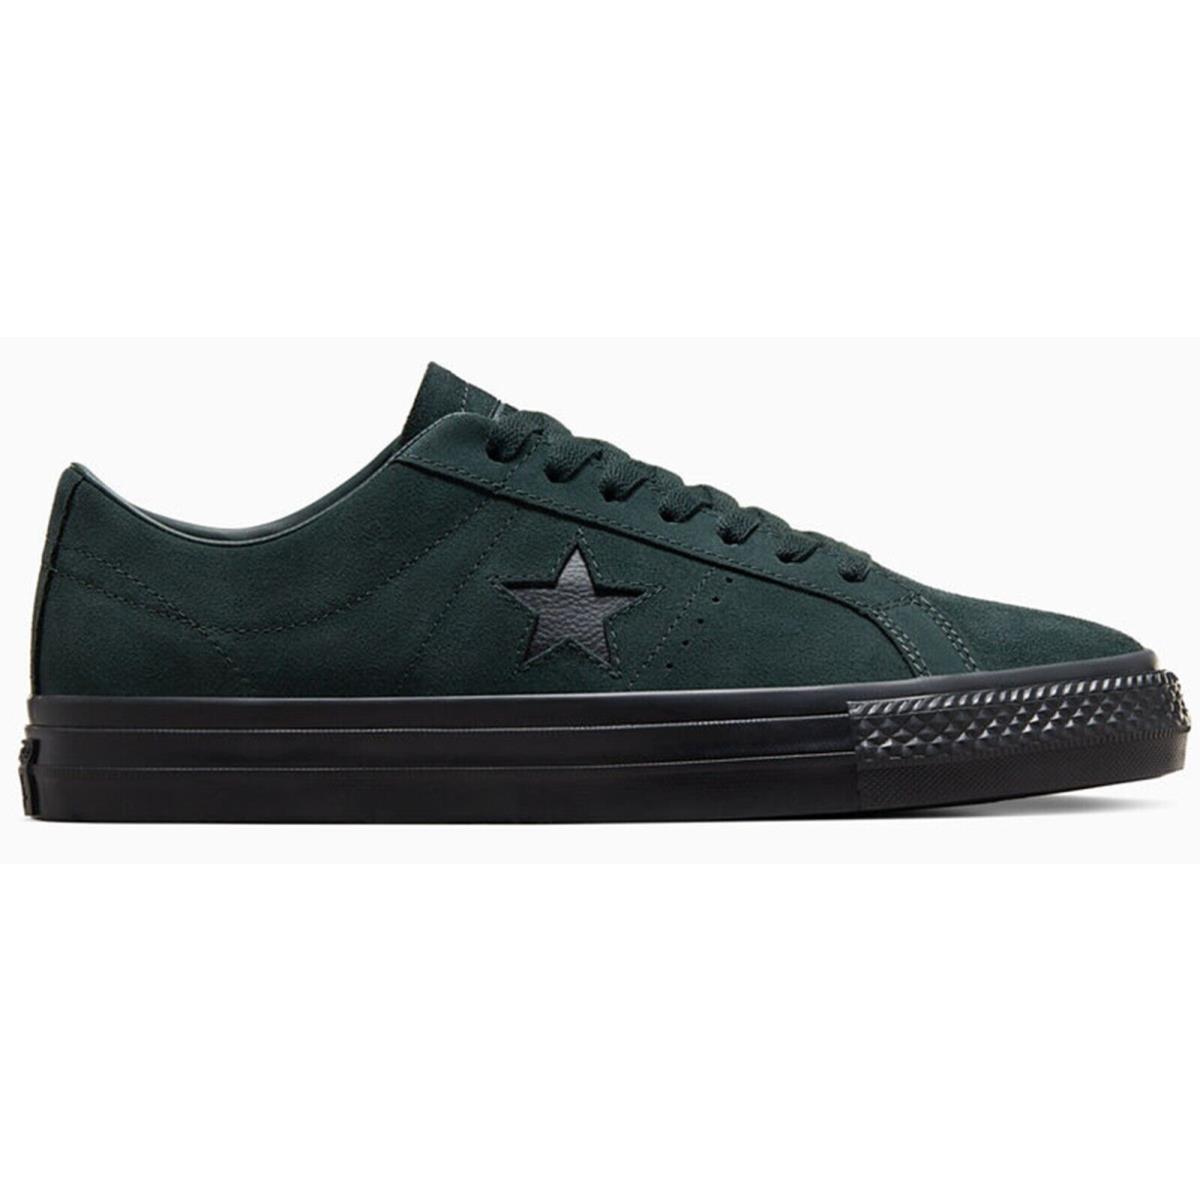 Converse One Star Pro Limited Edition Suede Low Top Men`s Shoes Foam Cushioning Secret Pines Green/Black/Black